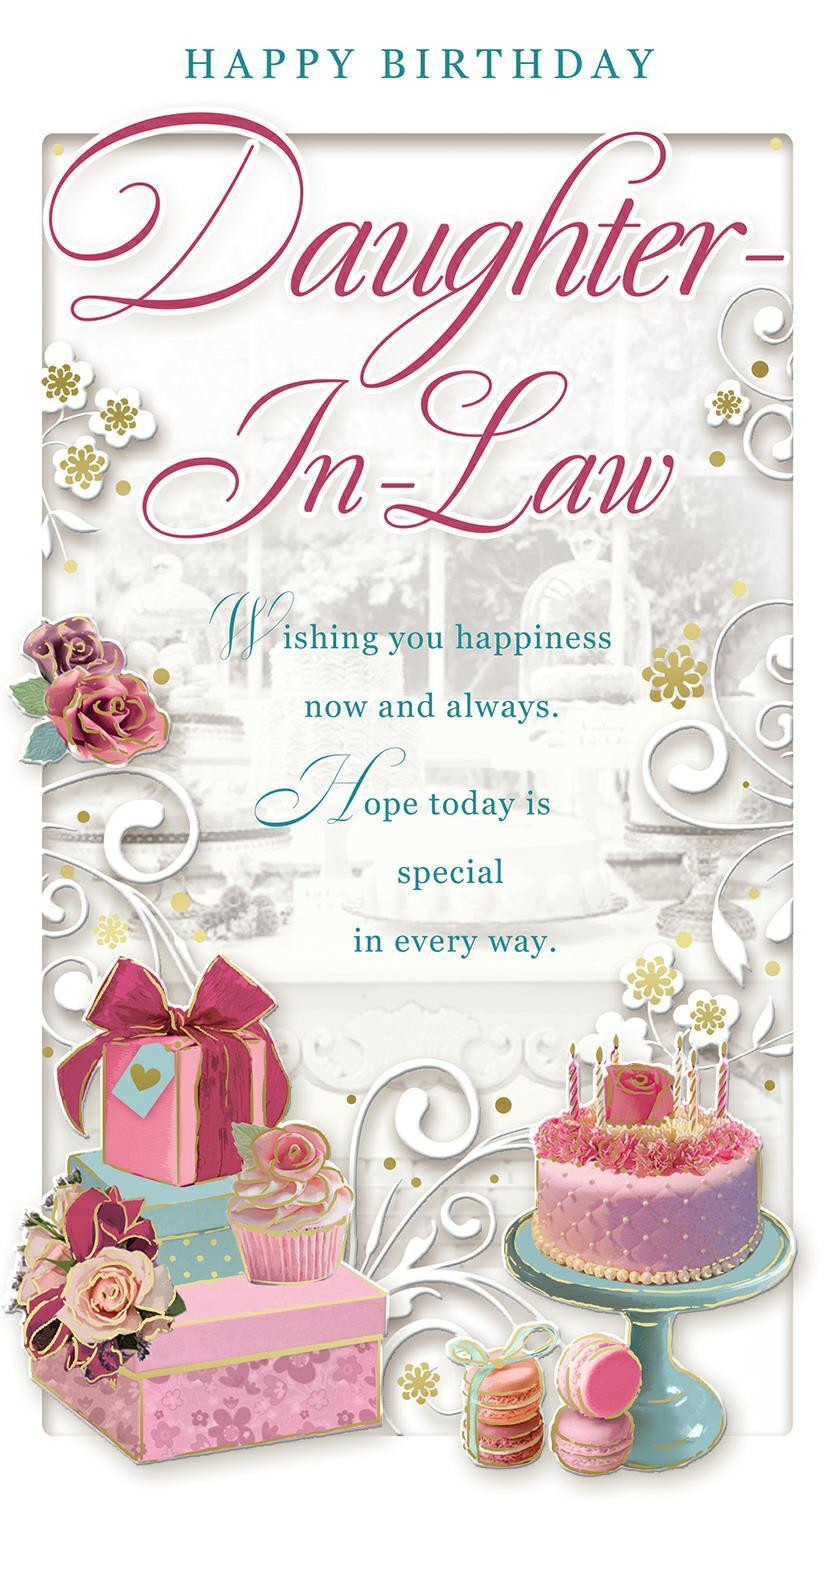 Birthday Gift Ideas For Daughter In Law
 HAPPY BIRTHDAY DAUGHTER IN LAW CARD CUPCAKE ROSES GIFTS